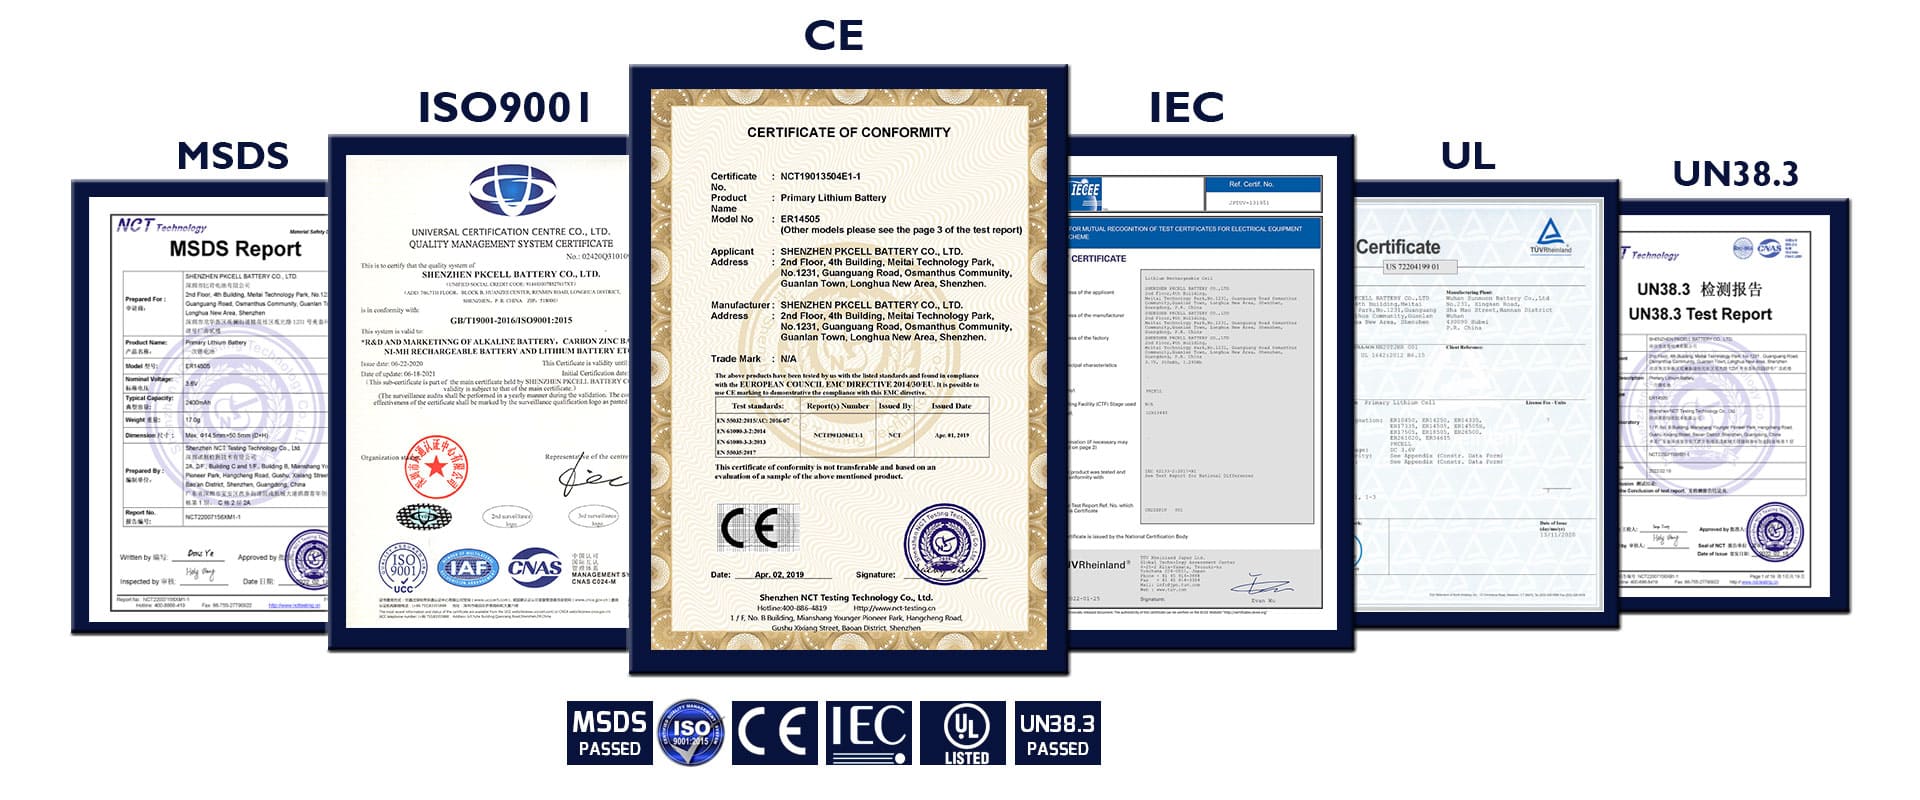 PKCELL Certificates